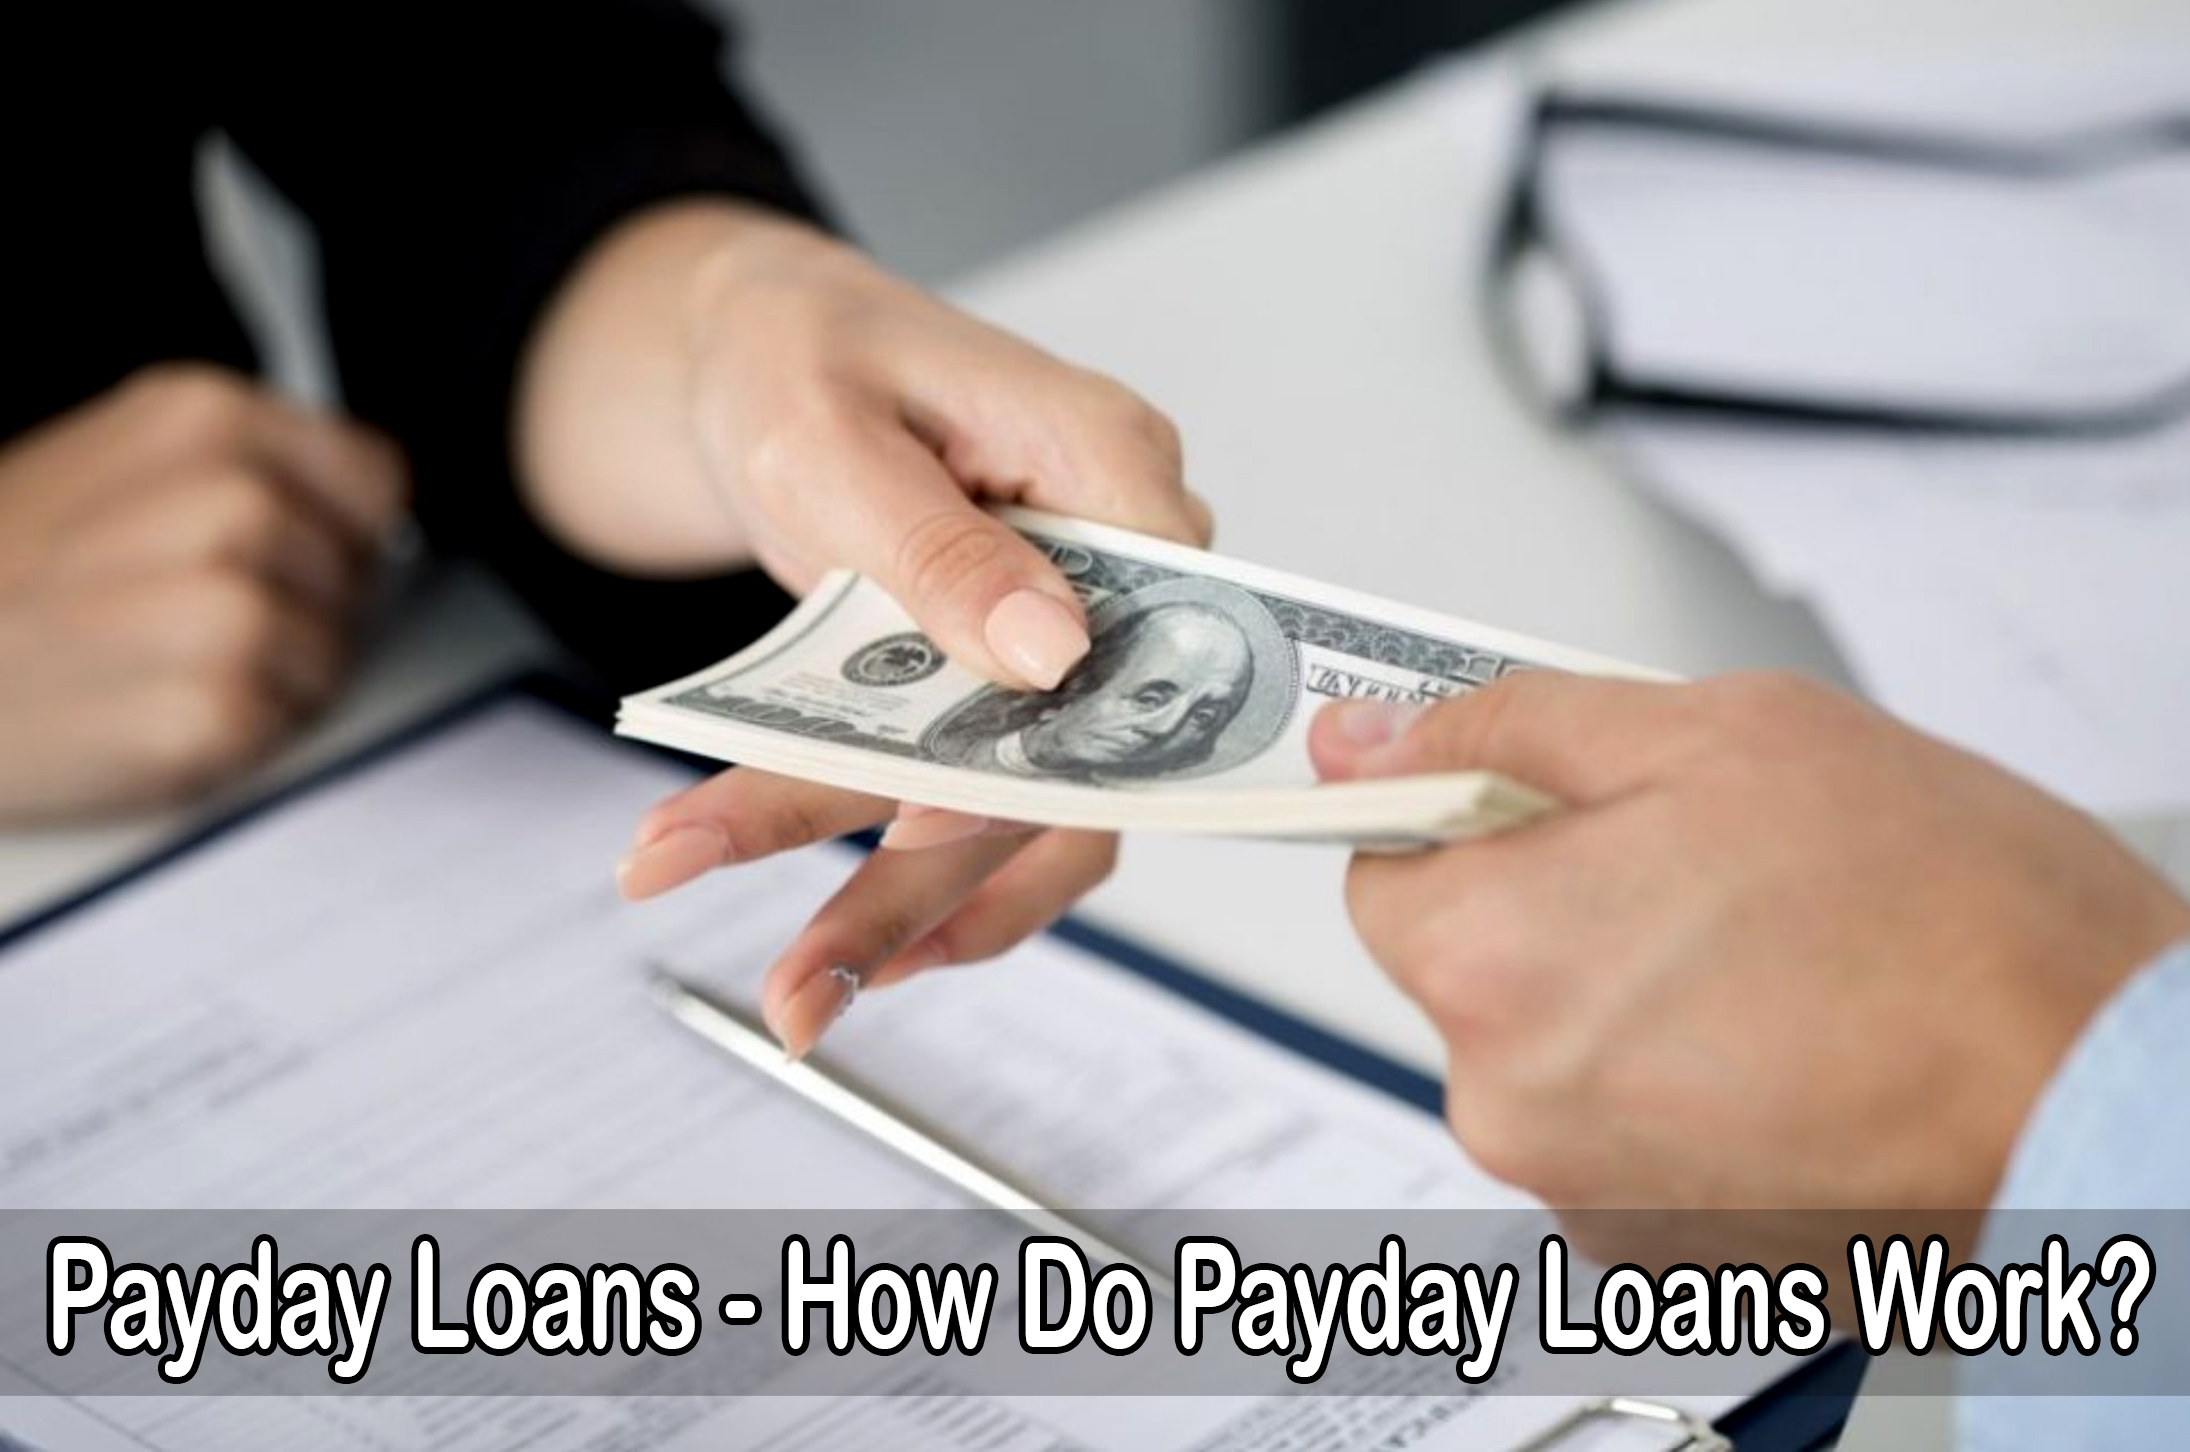 Payday Loans - How Do Payday Loans Work?